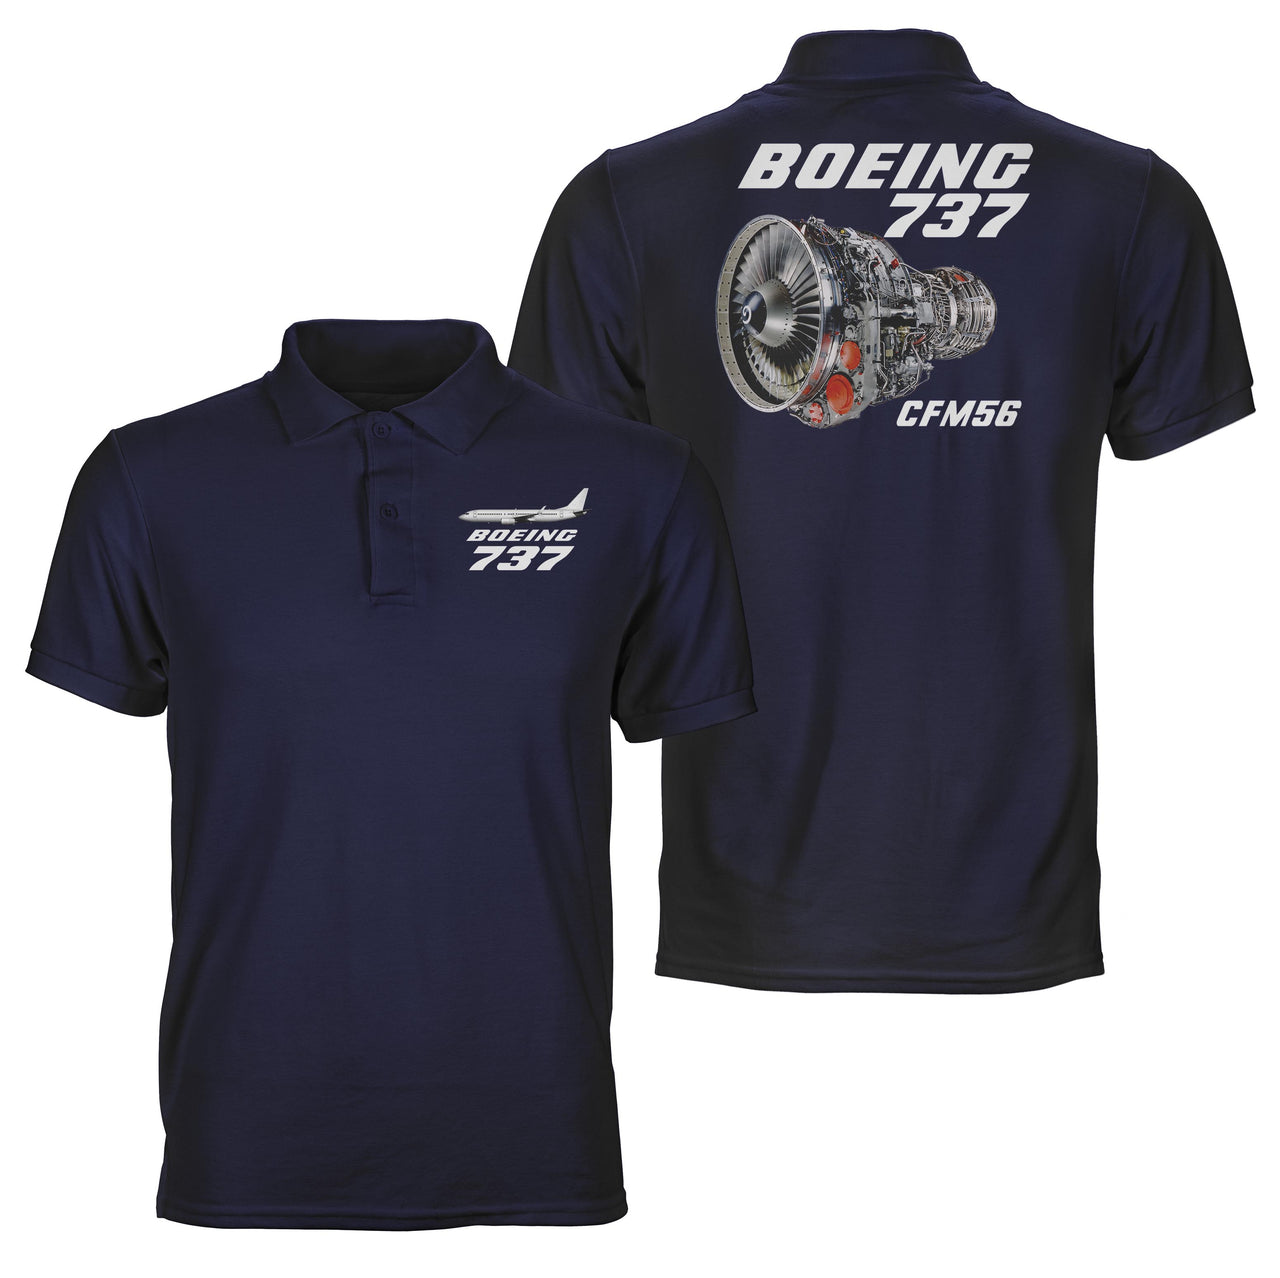 Boeing 737 Engine & CFM56 Designed Double Side Polo T-Shirts